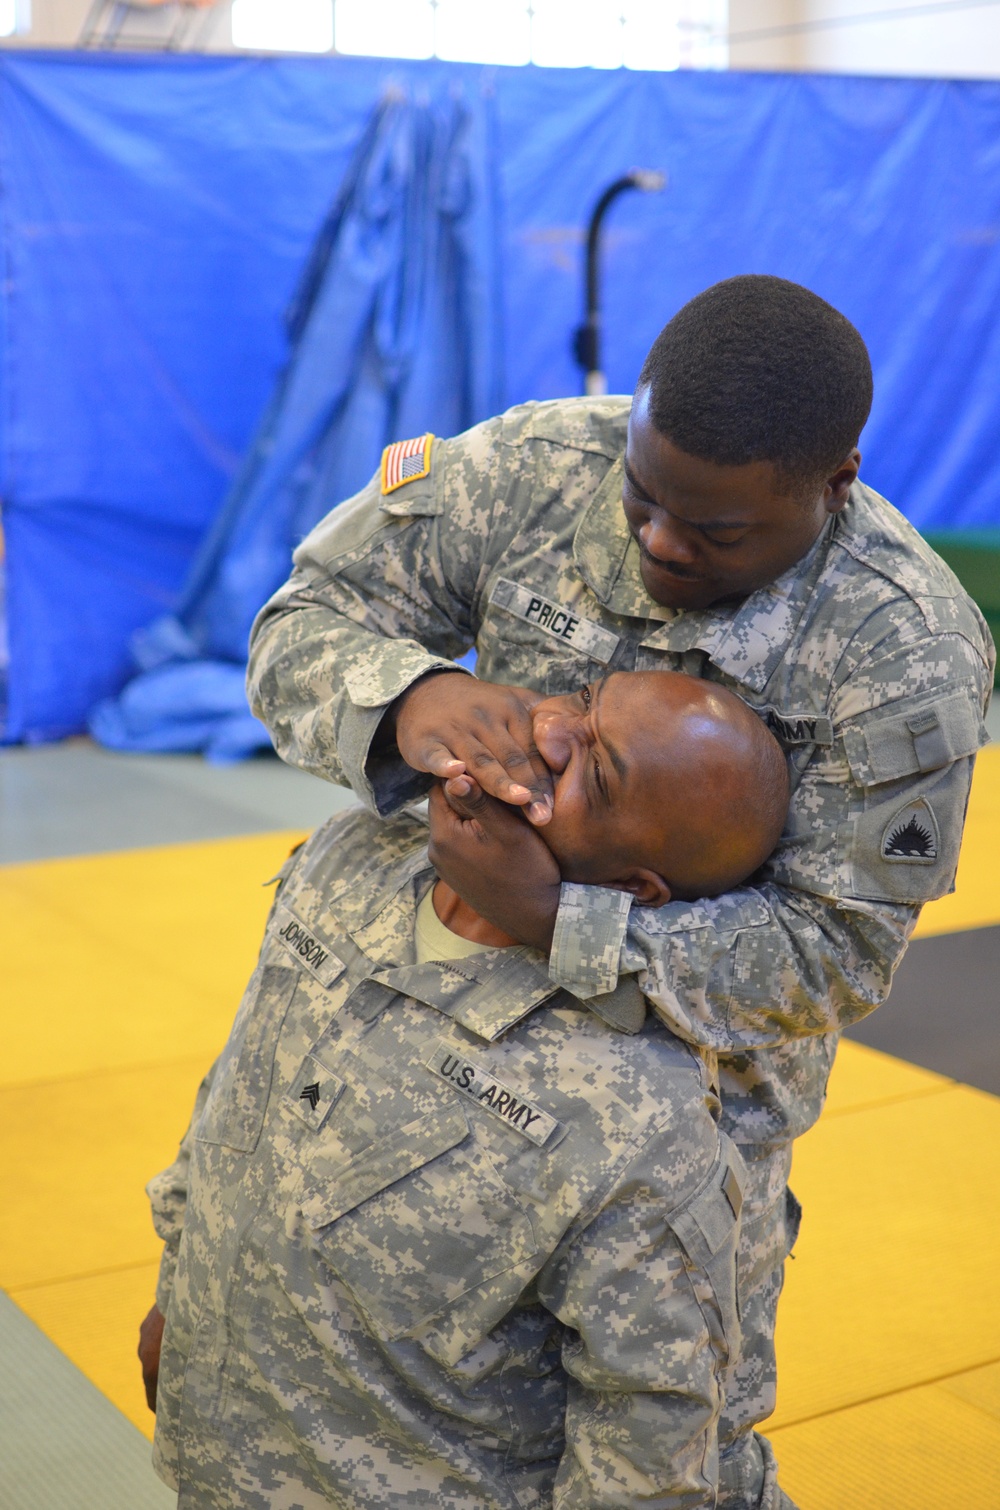 District of Columbia National Guard completes corrections training at Fort Leavenworth